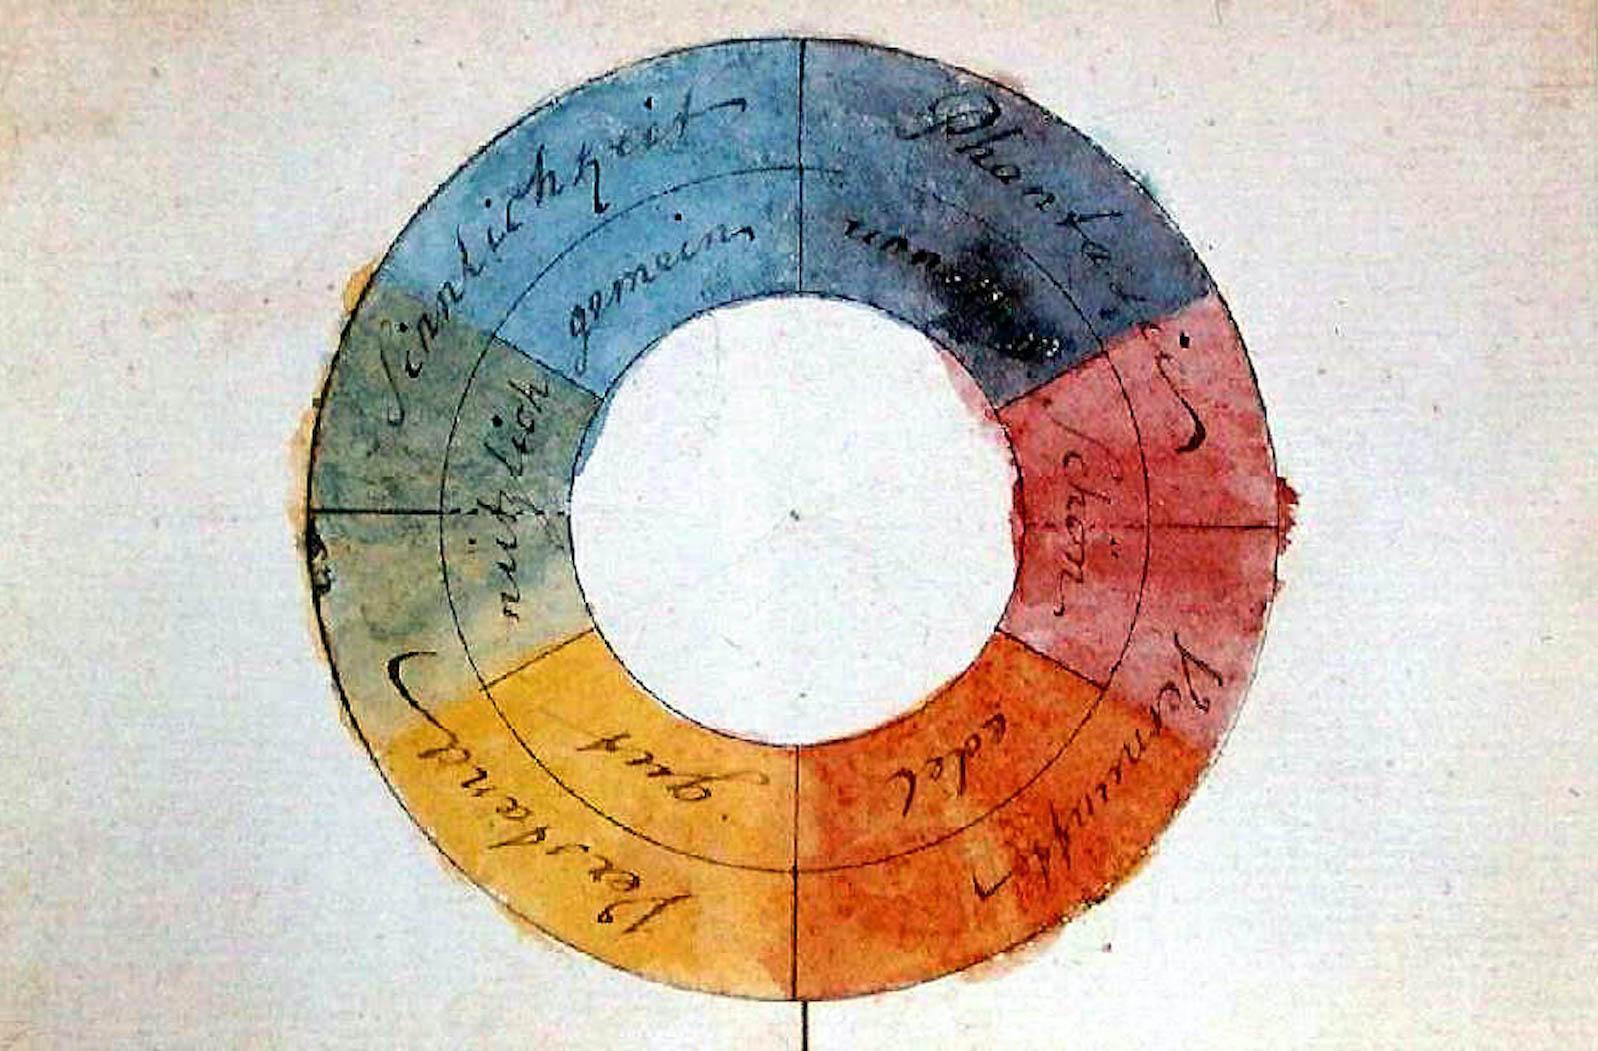 Who Came Up With the Color Wheel?